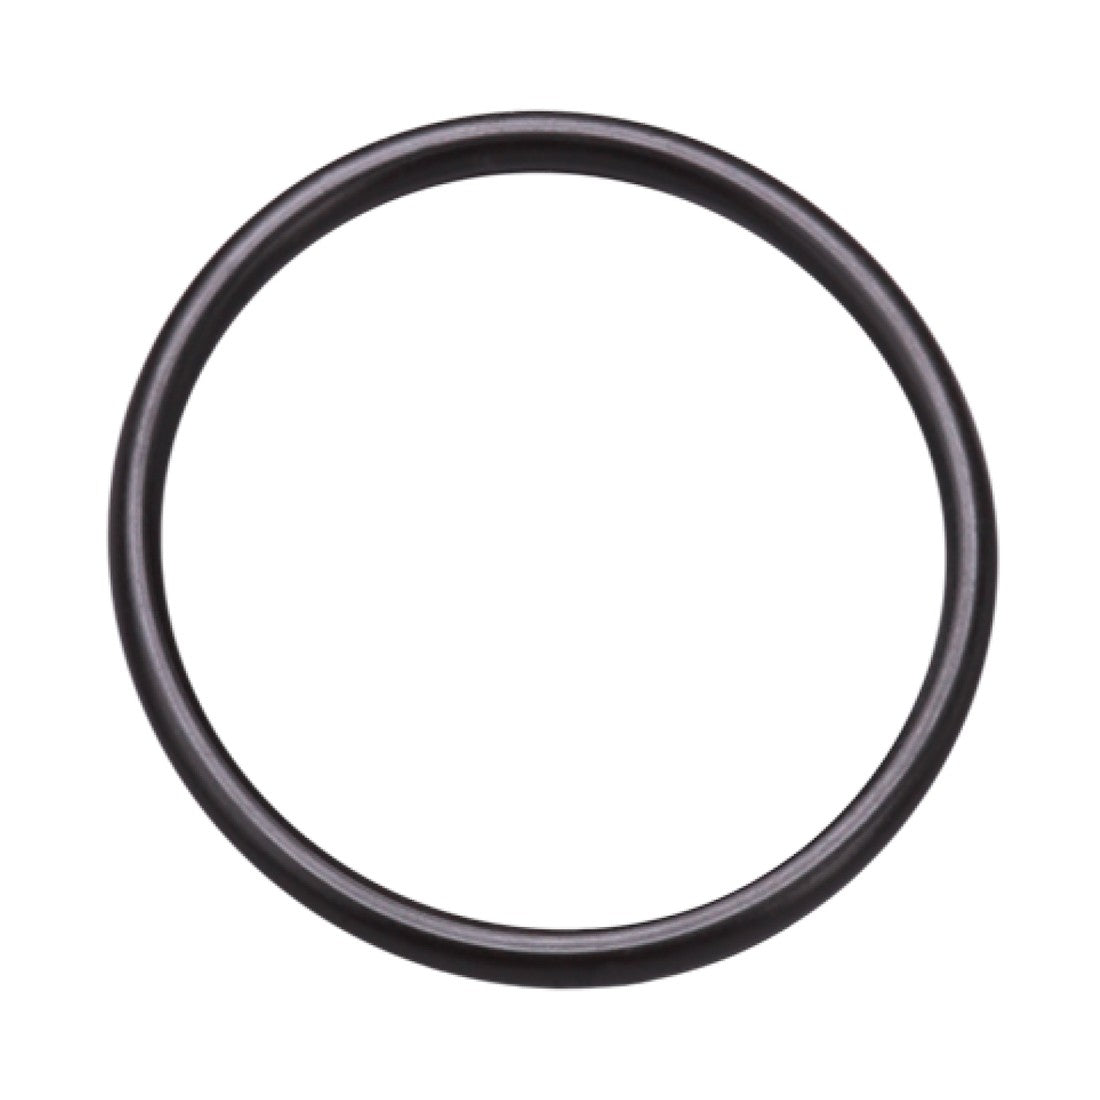 IPC Eagle Replacement O-Ring Kit for Hydro Cart Carbon / Sediment Housing - Top View